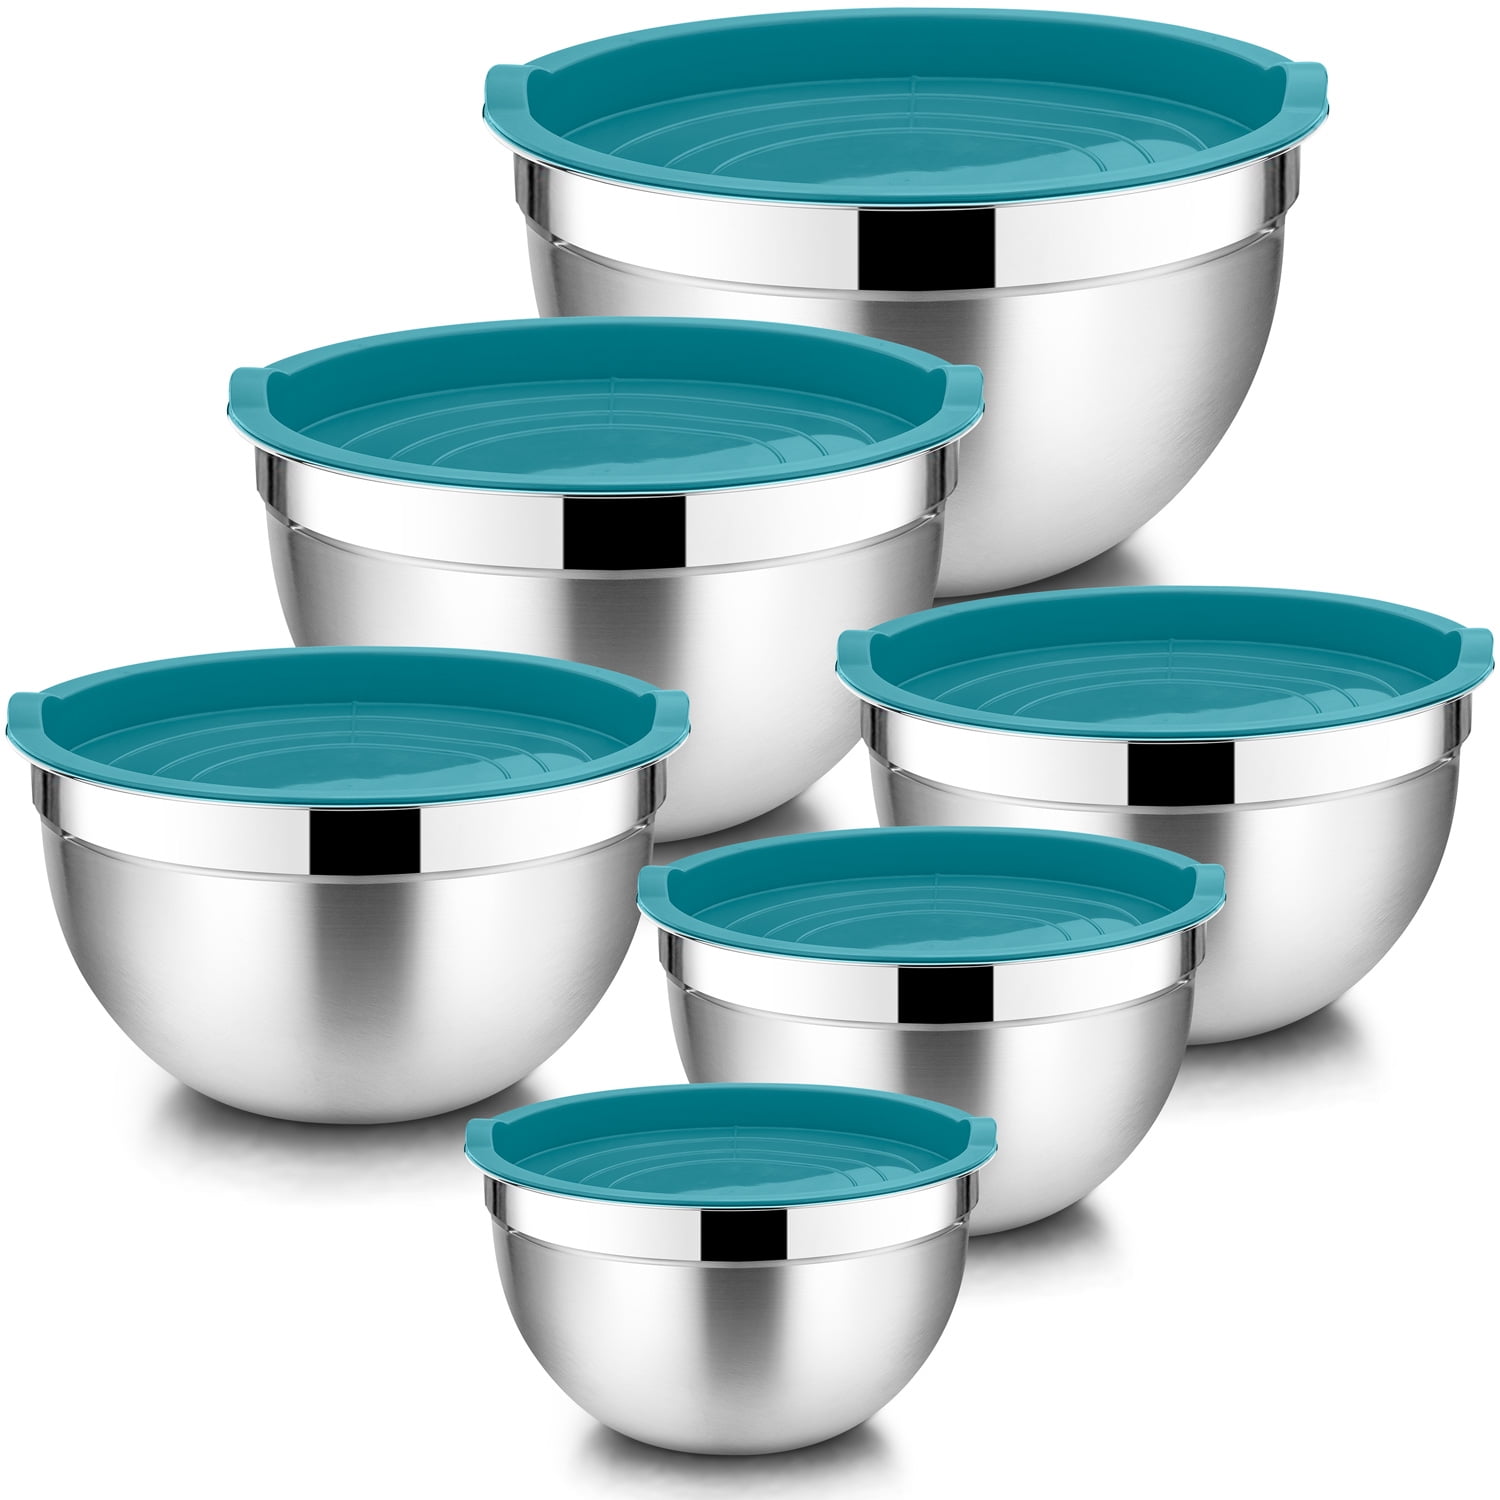 Walchoice Mixing Bowls with Lid Set of 6, Stainless Steel Metal Nesting  Bowls for Cooking, Baking, Preparing, Serving, Size 4.5/3/2.5/1.5/1/0.7 QT  